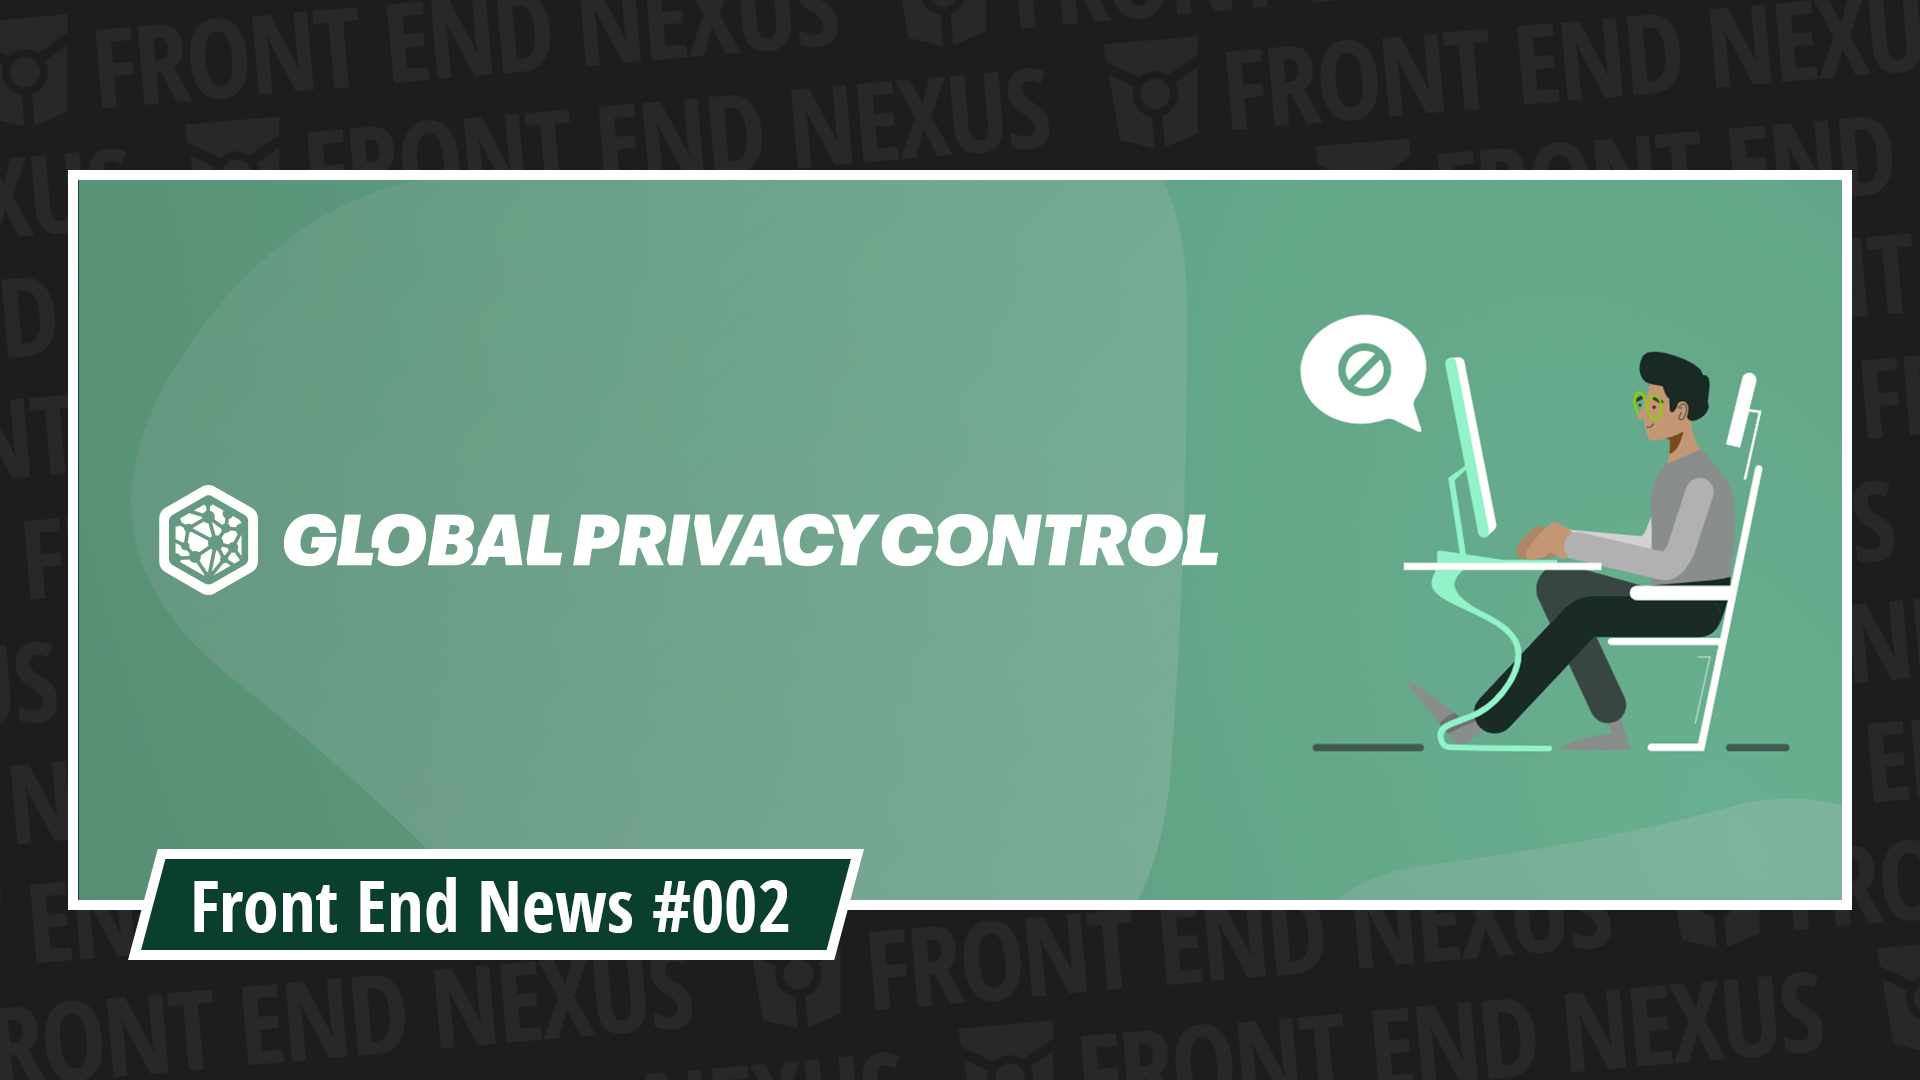 The launch of Global Privacy Control, 2020 Material Design Awards, and the 2020 React Community Survey | Front End News #002